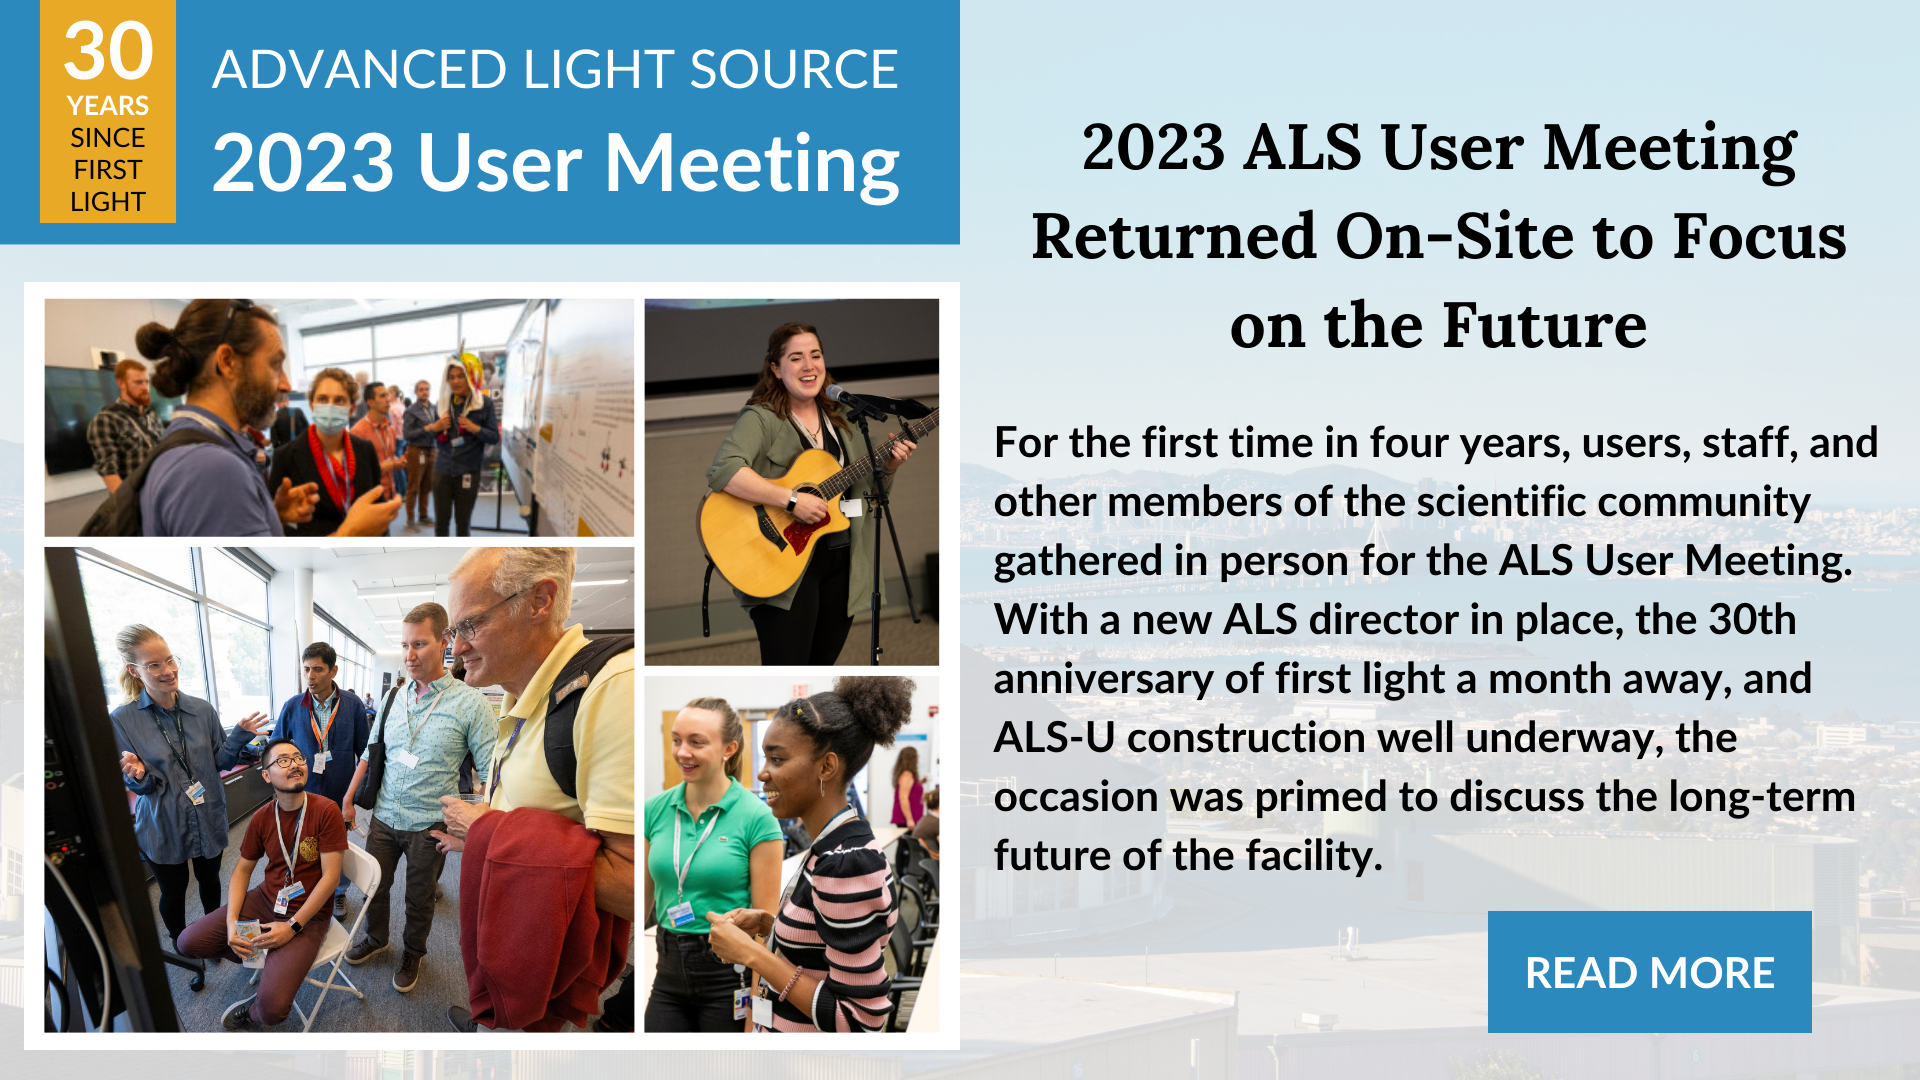 For the first time in four years, users, staff, and other members of the scientific community gathered in person for the ALS User Meeting. With a new ALS director in place, the 30th anniversary of first light a month away, and ALS-U construction well underway, the occasion was primed to discuss the long-term future of the facility.